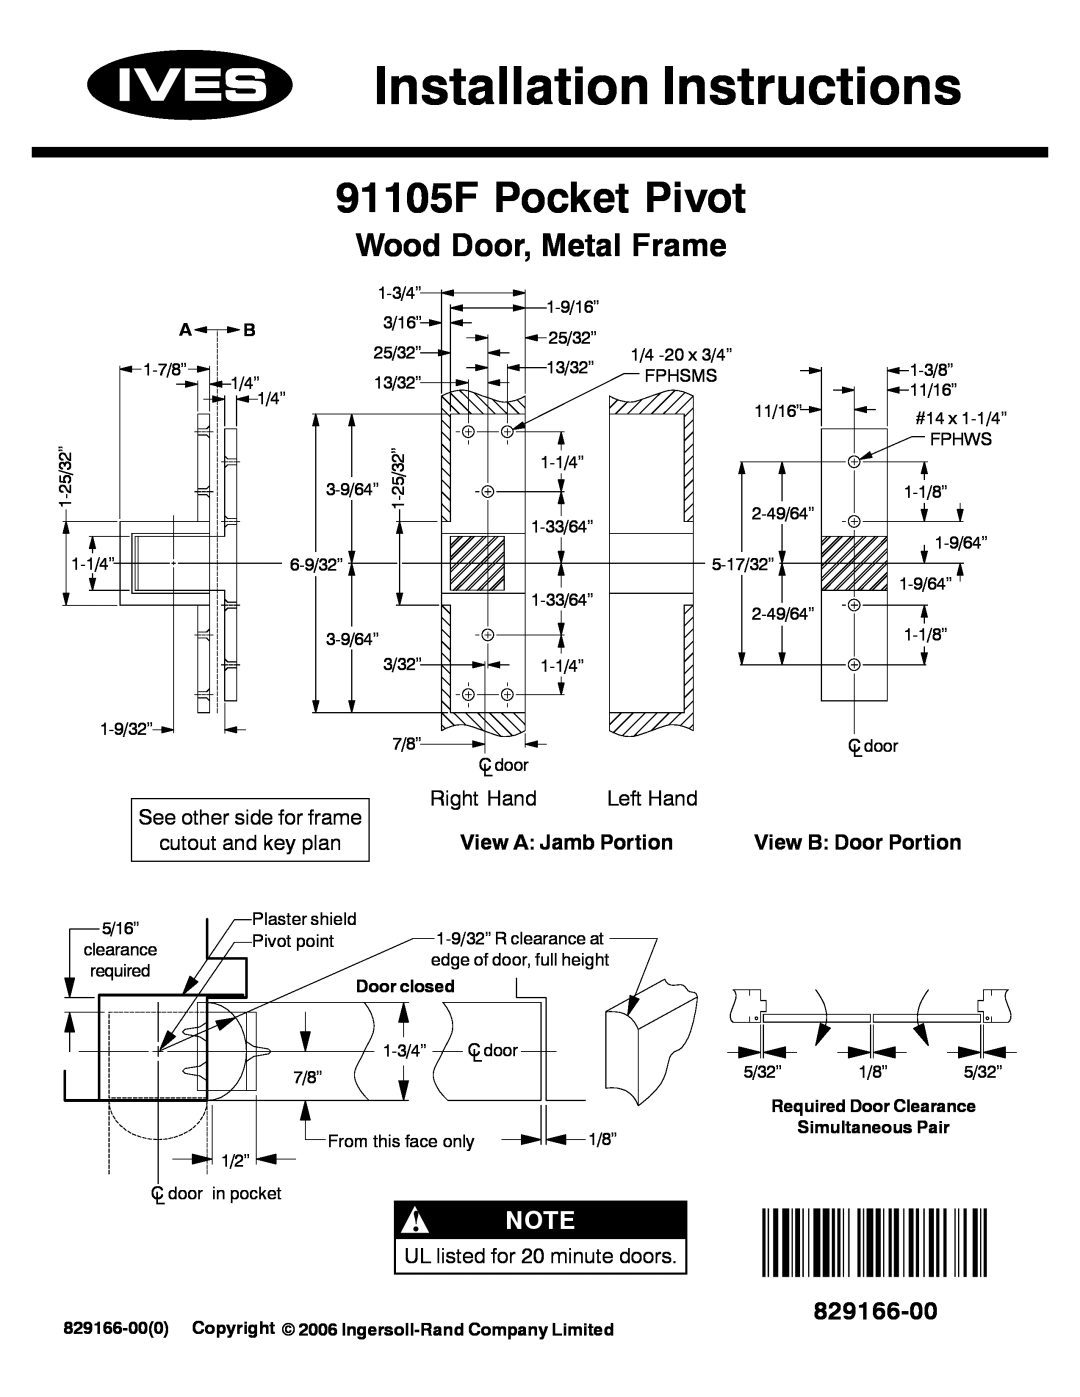 Ives 91105F installation instructions Wood Door, Metal Frame, See other side for frame cutout and key plan, Right Hand 